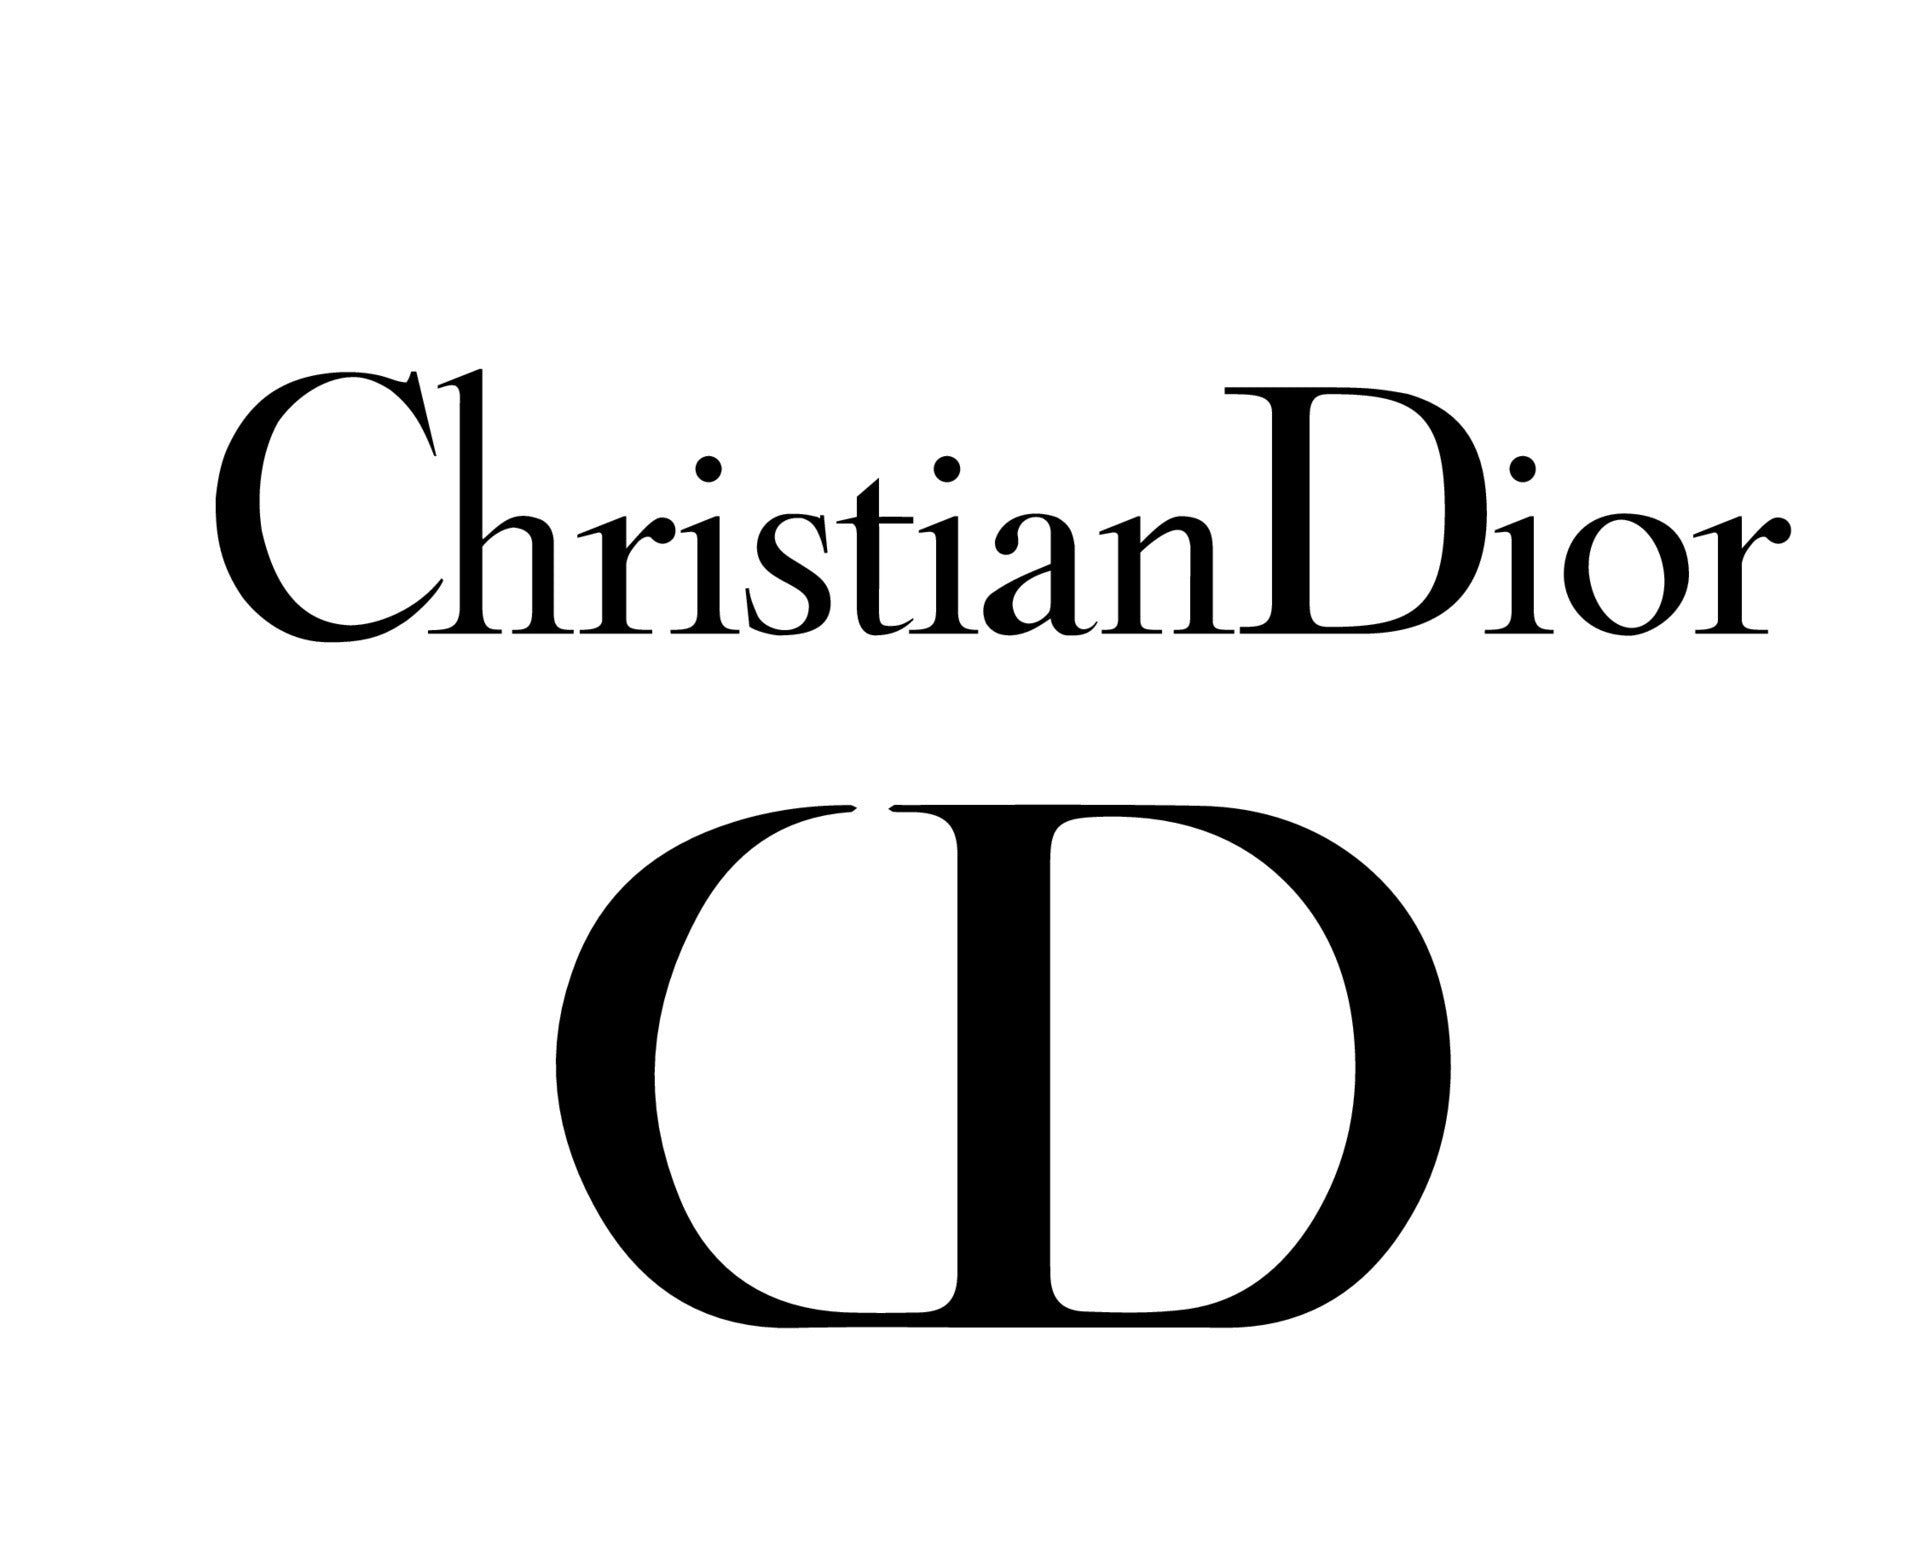 Christian Dior - Psychic Readings